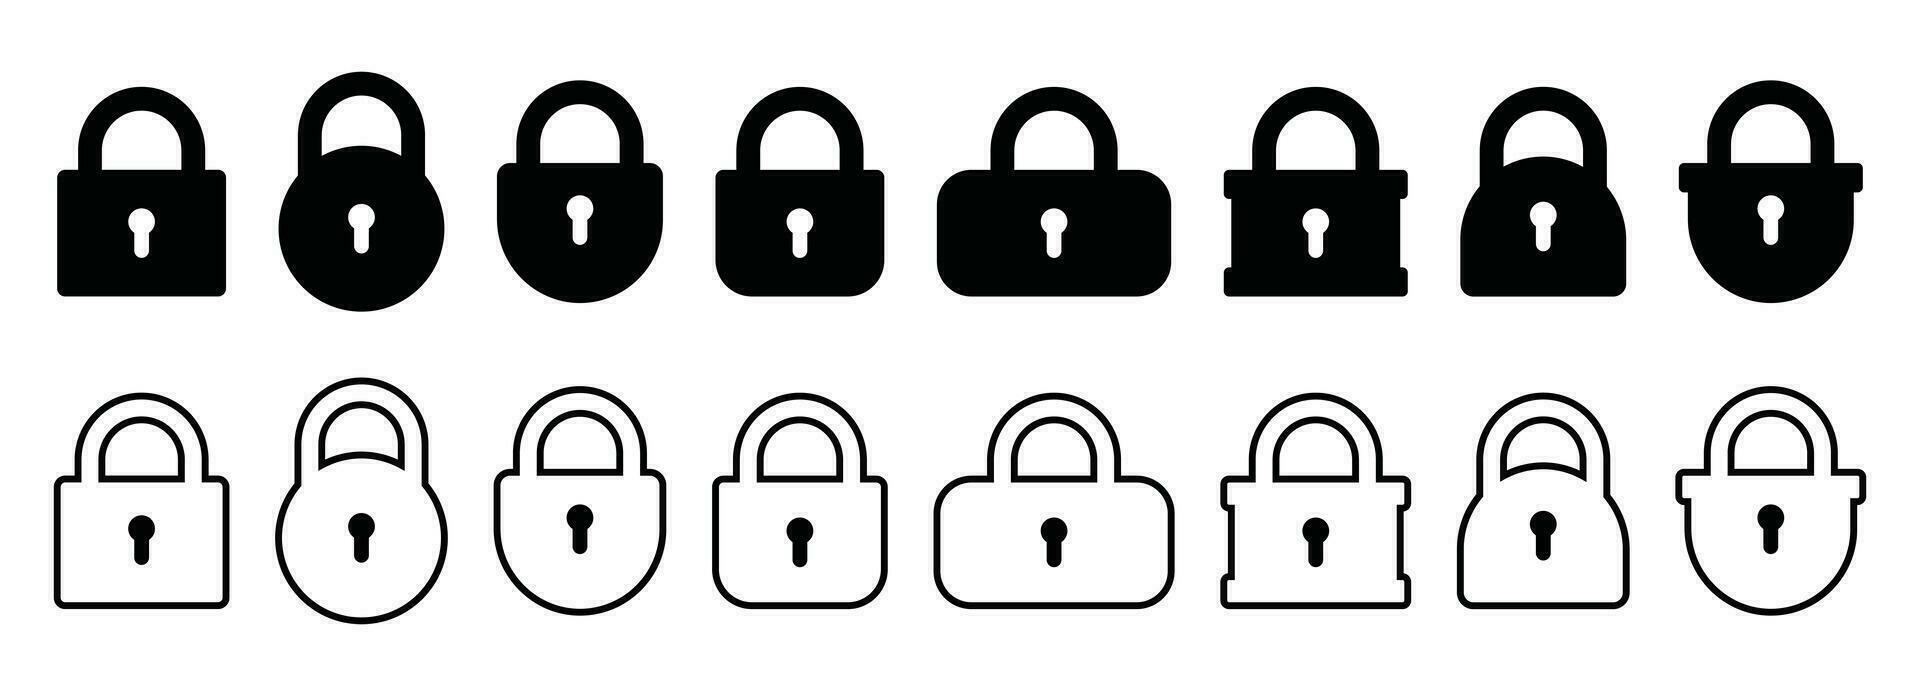 Opened and closed padlock icon in flat style. Lock vector illustration. Security check sign